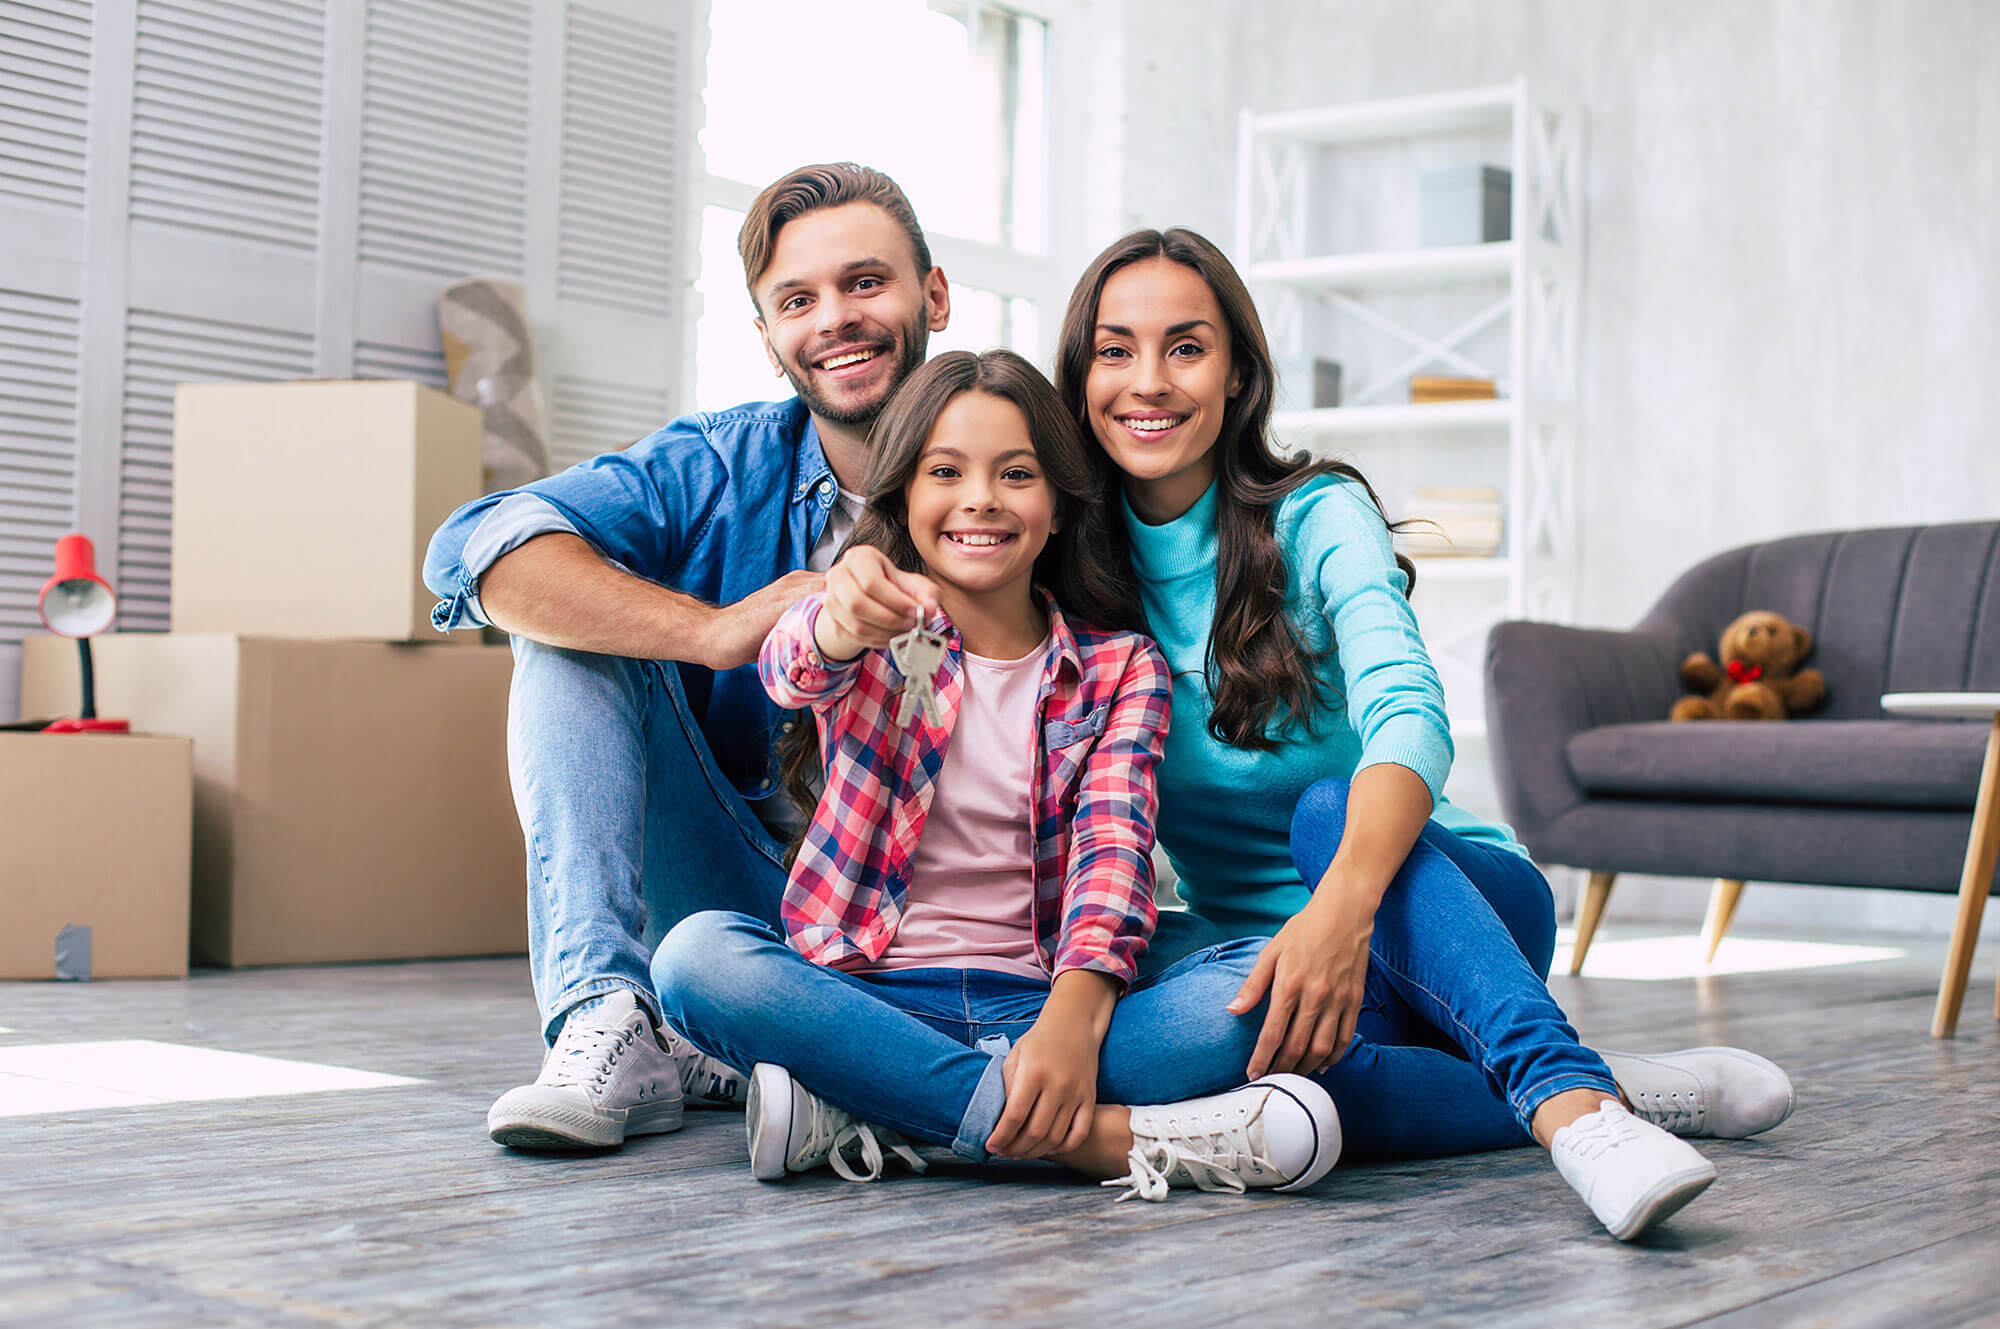 Photo of a Small Family sitting in front of Boxes holding Keys